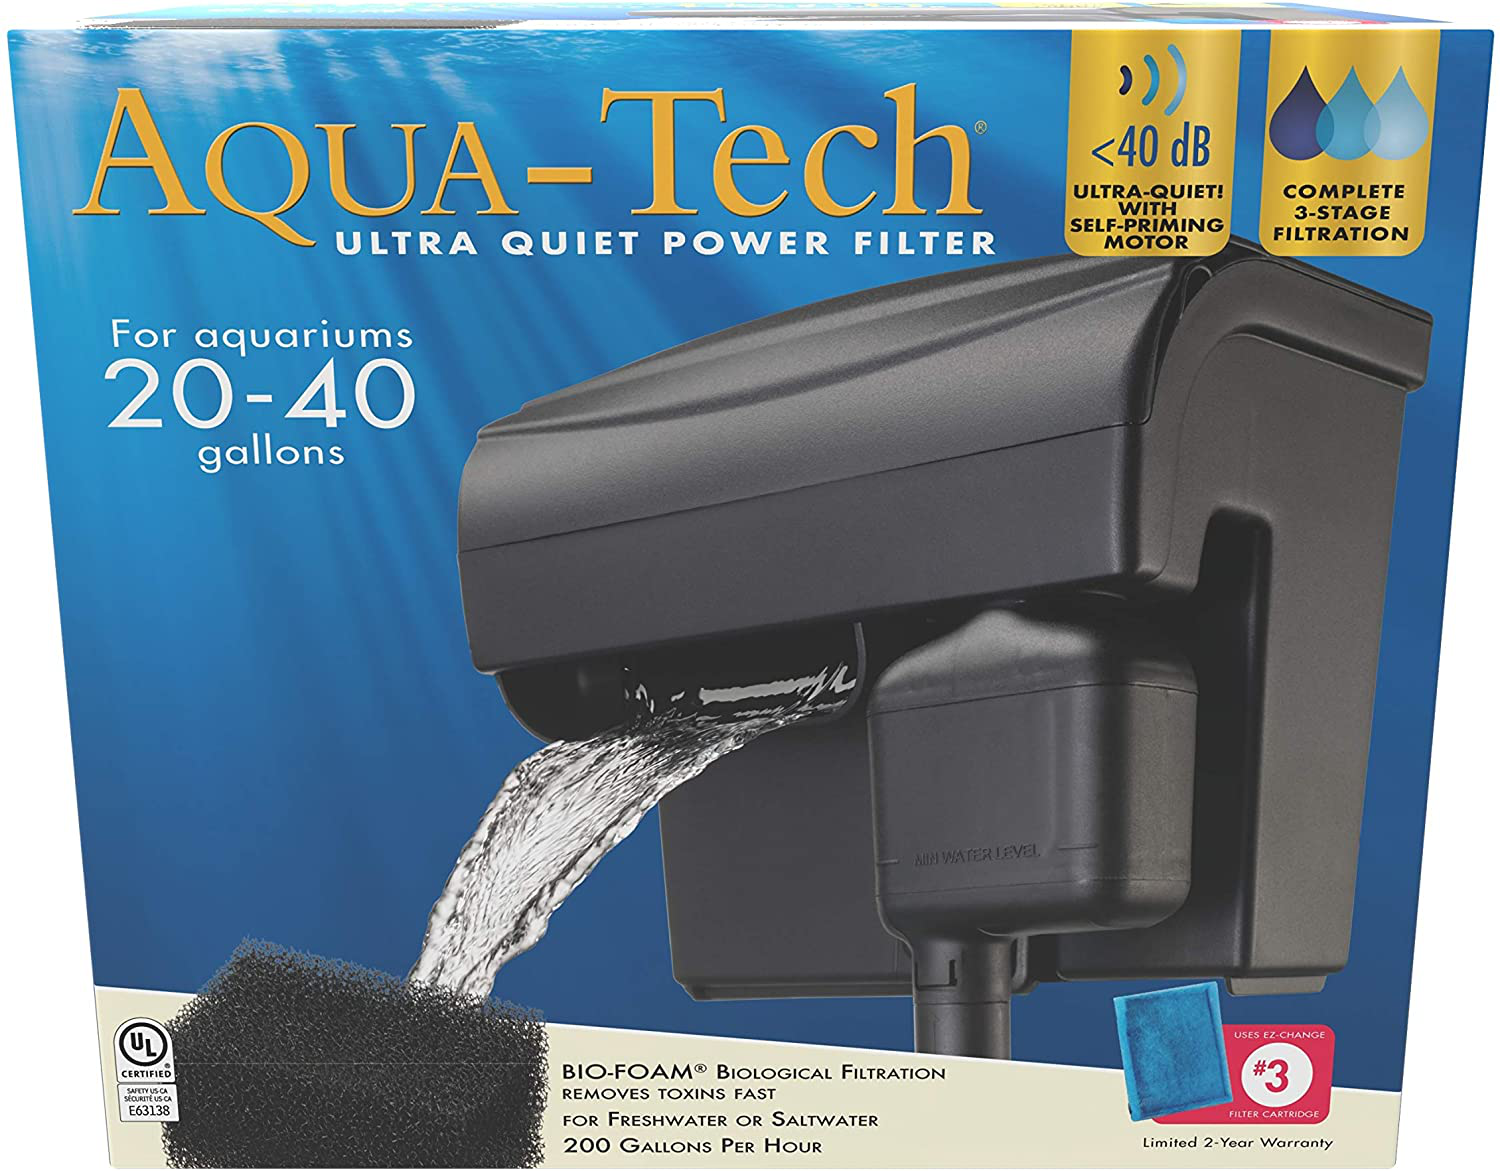 AQUA-TECH Power Filter for Aquariums, 3-Stage Filtration (Packaging May Vary) Animals & Pet Supplies > Pet Supplies > Fish Supplies > Aquarium Filters AQUA-TECH New - 20 to 40 Gallon  